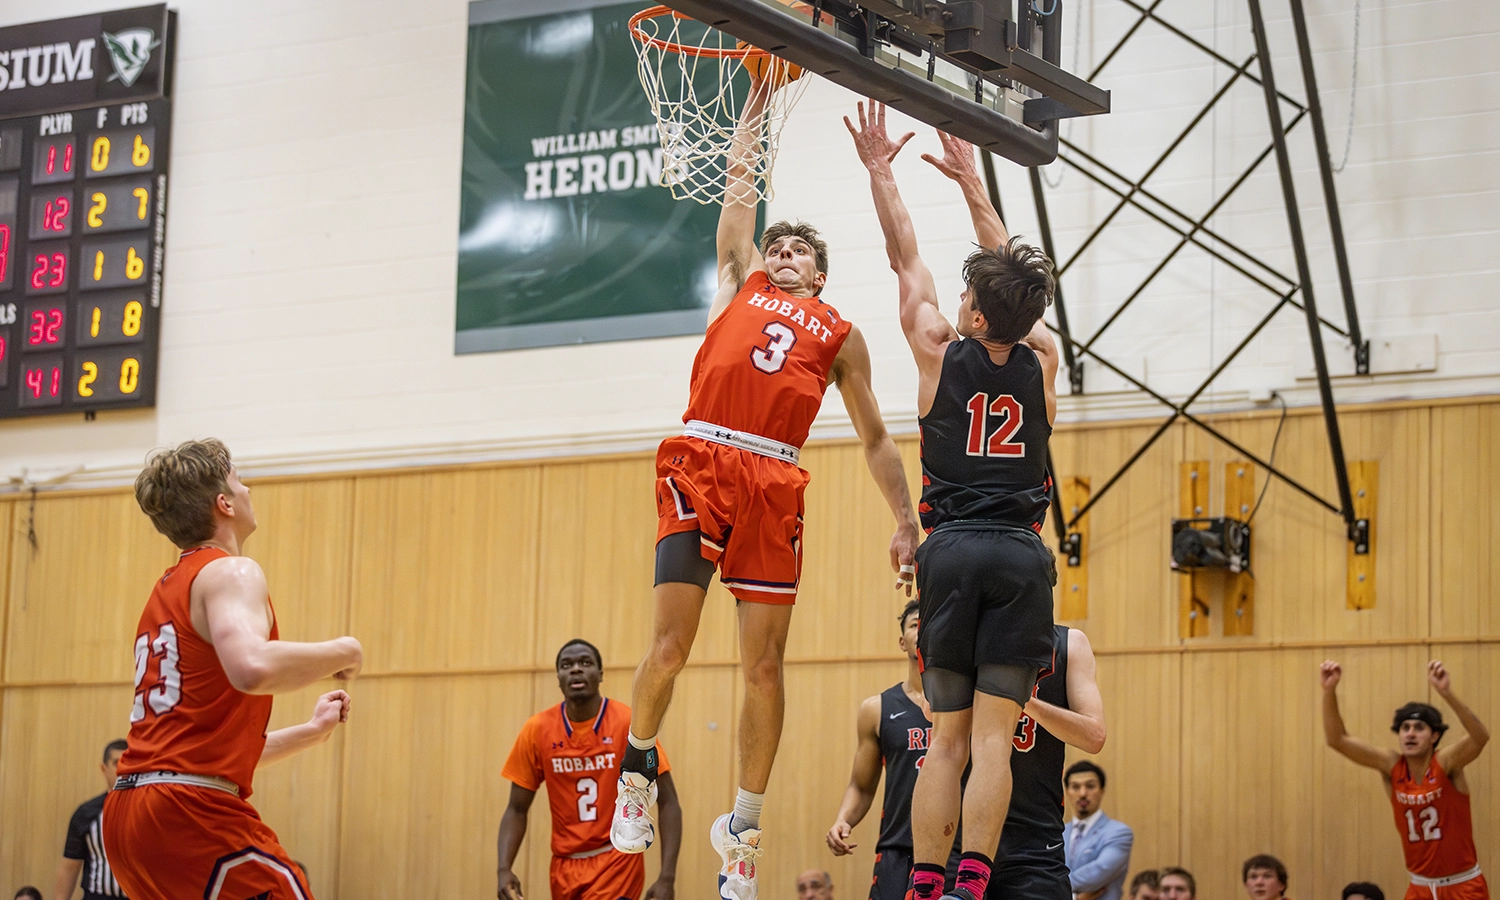 Pat Healy ’25 goes for a dunk during Hobart’s win over RPI. The Statesmen beat the Engineers to improve to 7-0.